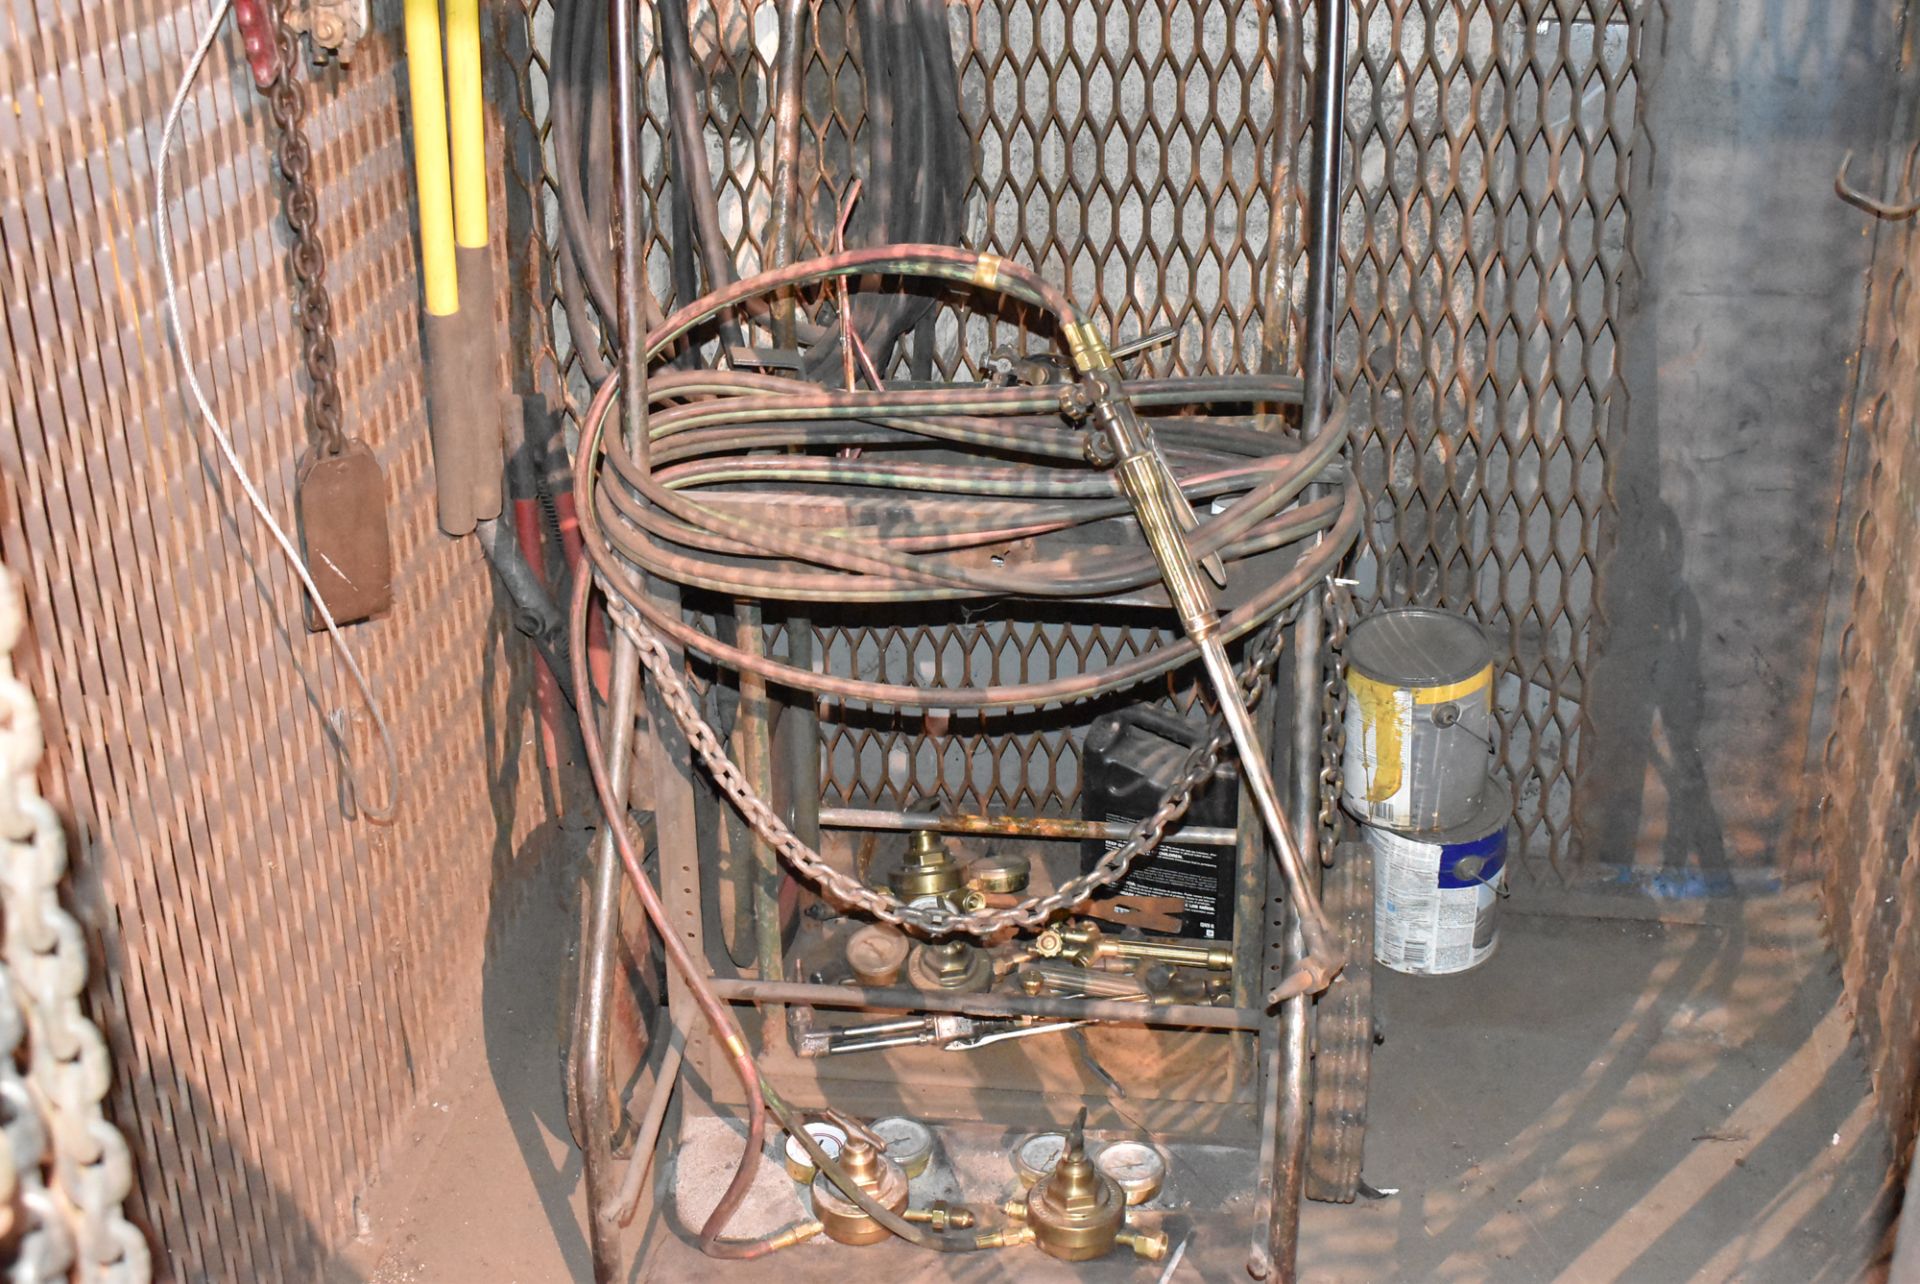 LOT/ CONTENTS OF CAGE CONSISTING OF LIFTING ATTACHMENTS, TOOLS, TORCH CADDIES - Image 2 of 4